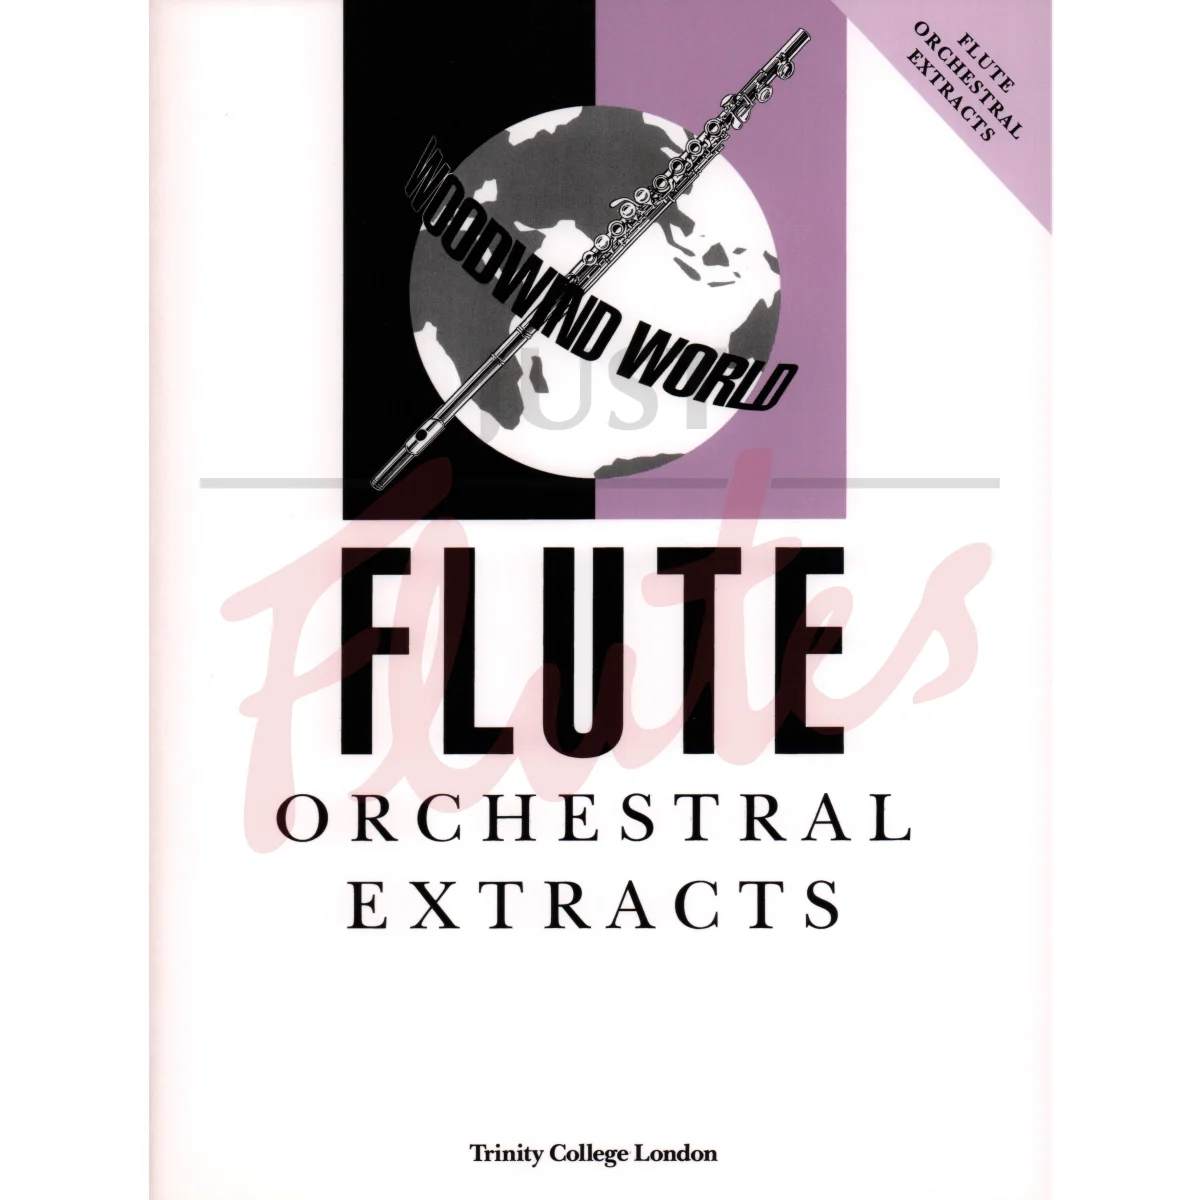 Woodwind World Orchestral Extracts for Flute